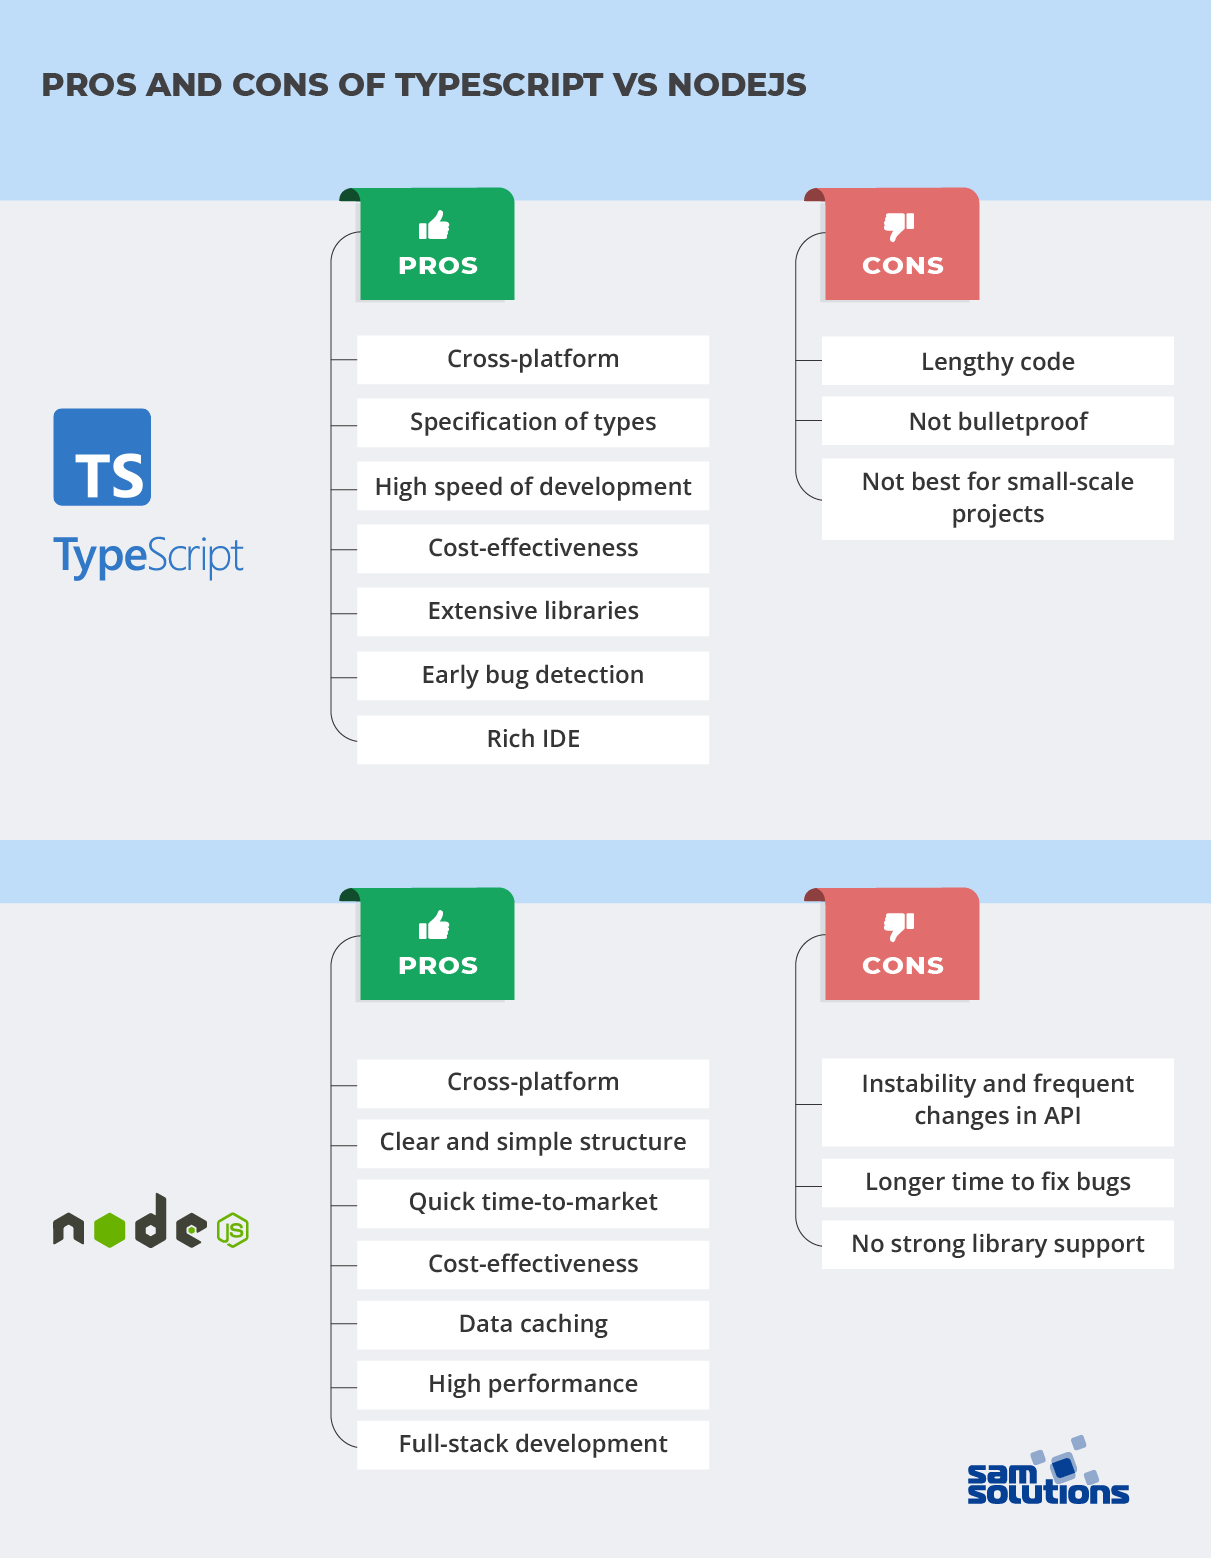 TypeScript vs JavaScript: Which One You Should Use, and Why